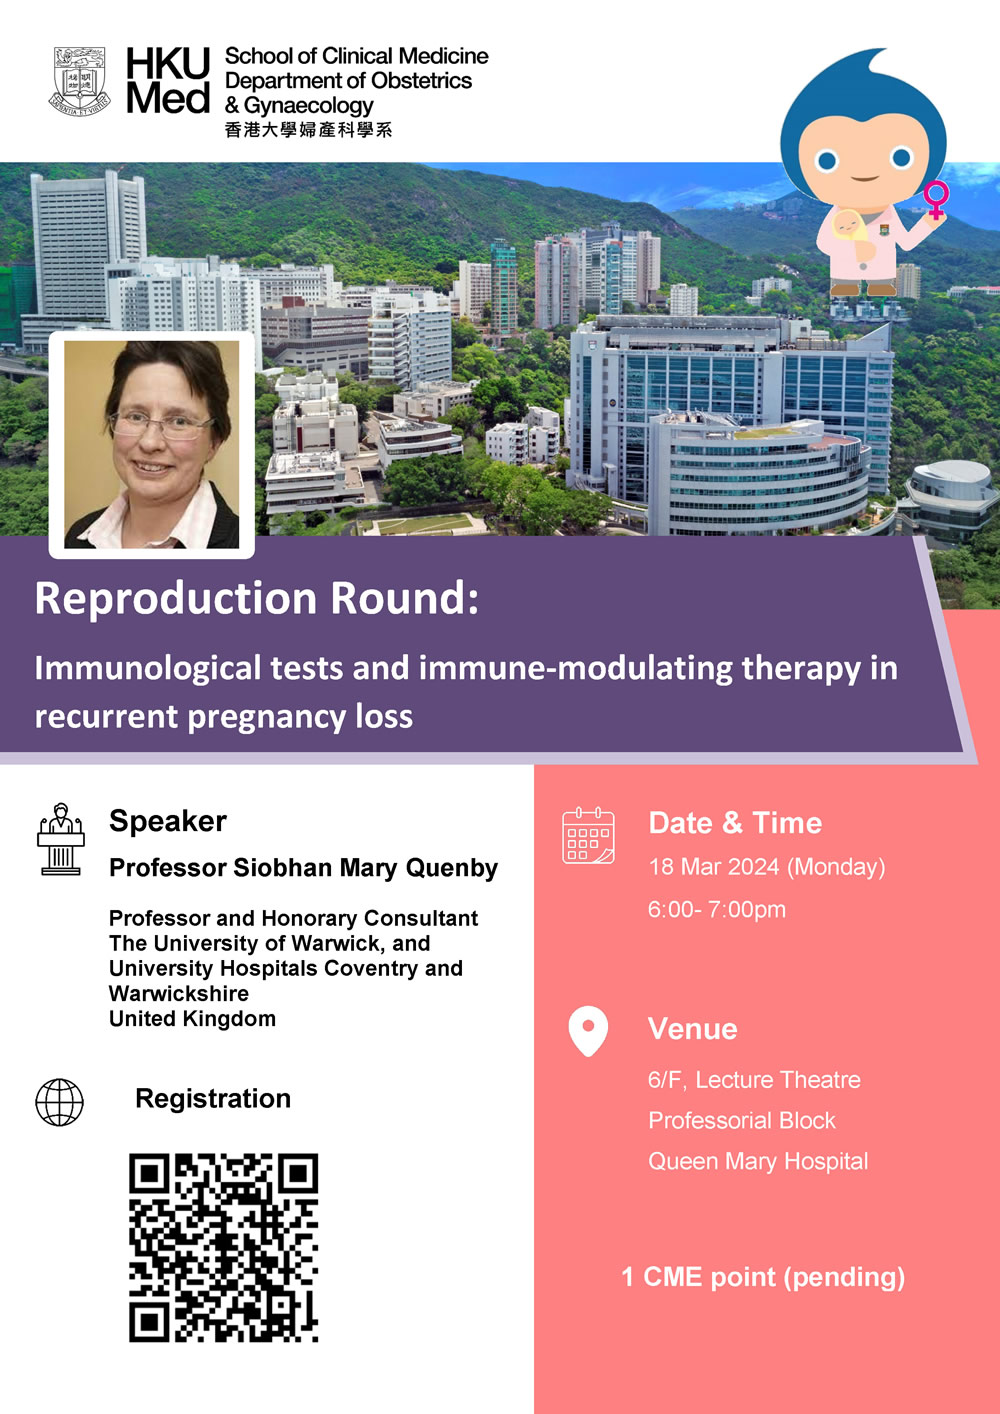 Reproduction round: Immunological tests and immune-modulating therapy in recurrent pregnancy loss